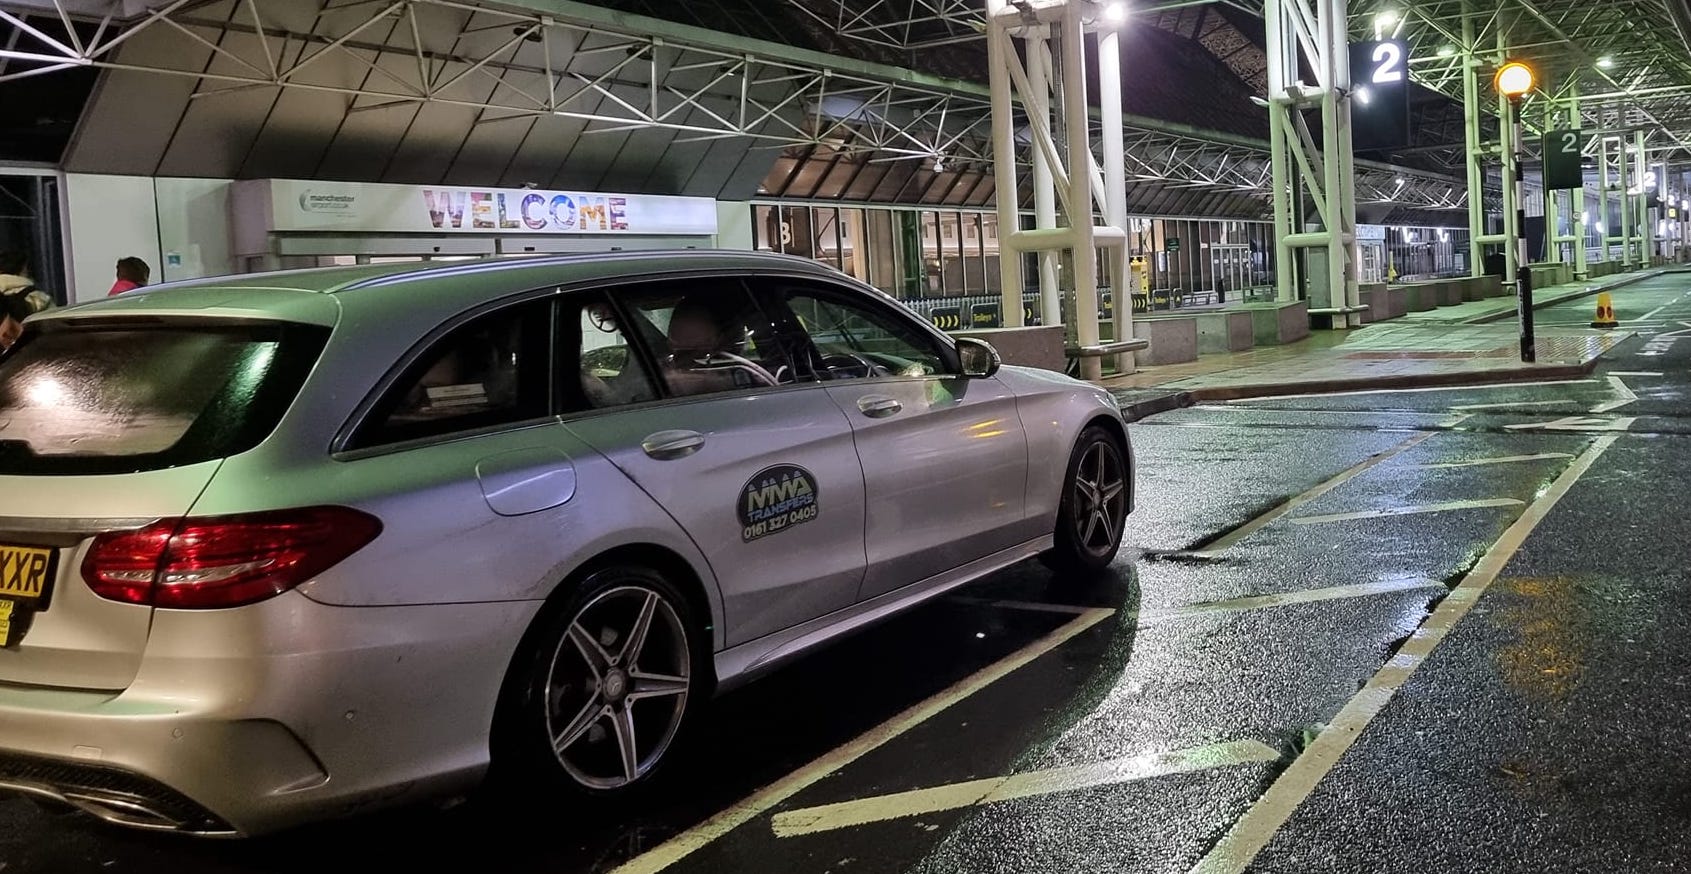 Take a Taxi from Manchester Airport to Birmingham with a free Meet and Greet Service